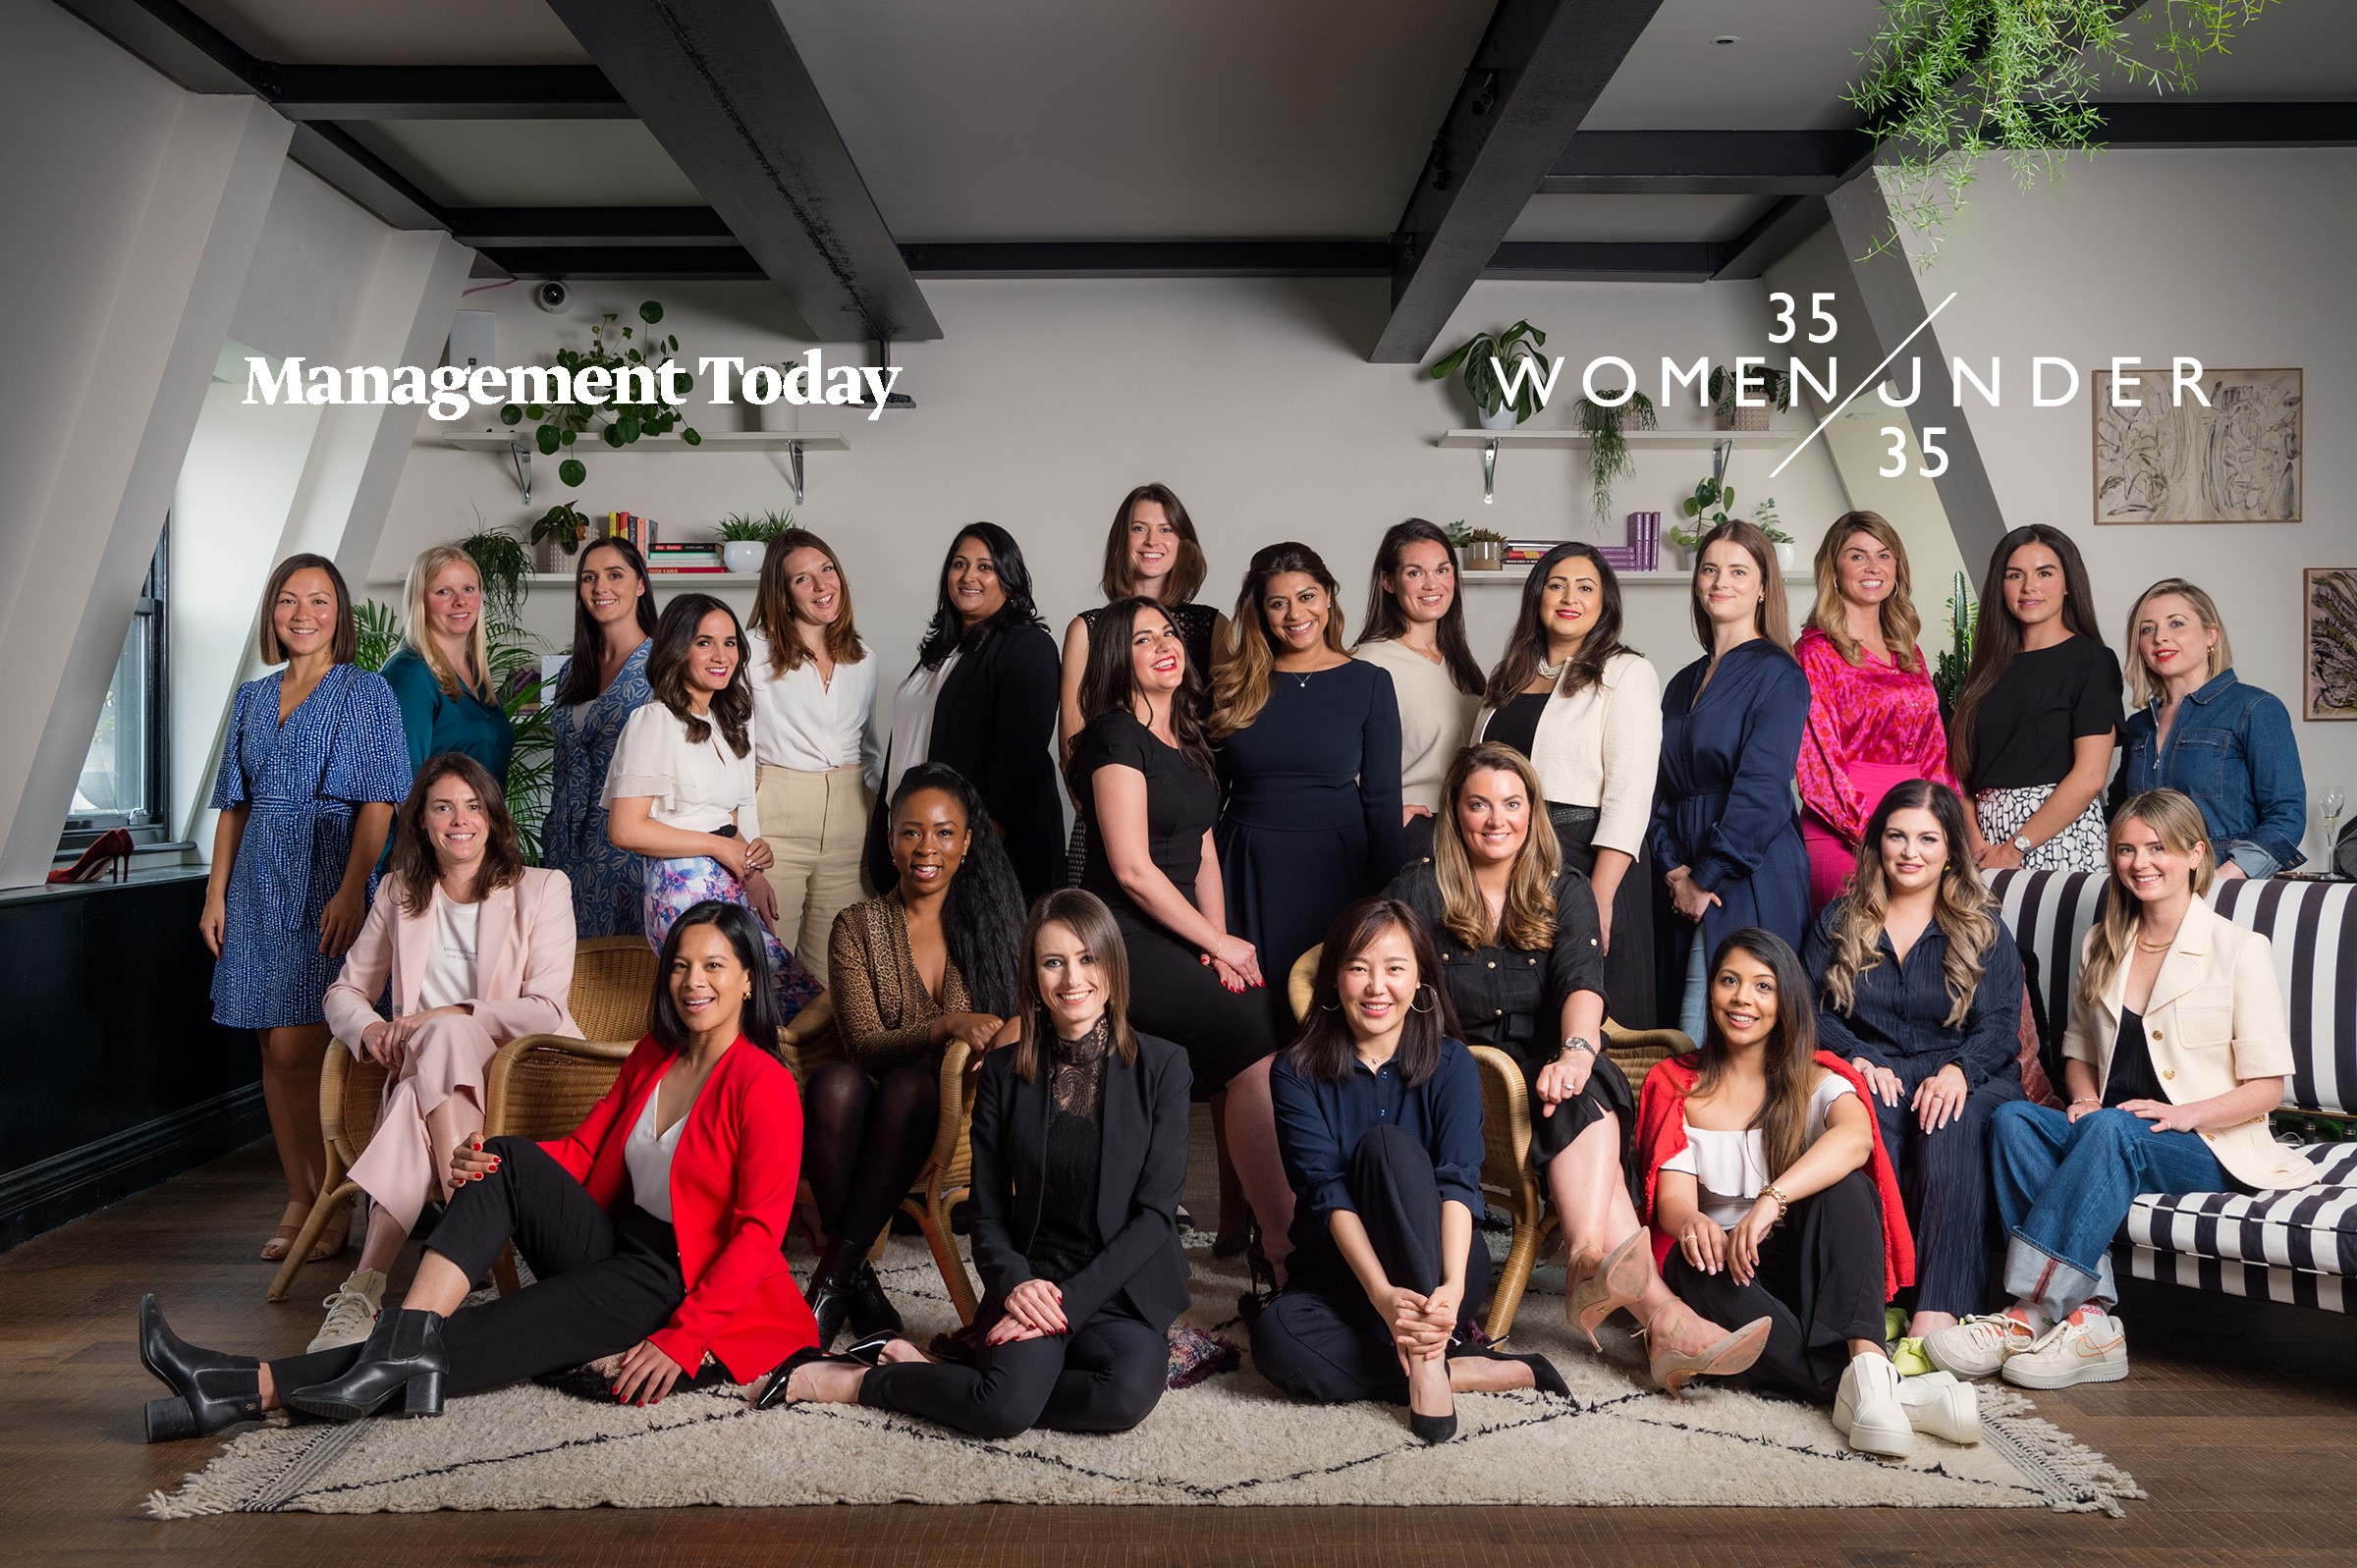 Joni Ferns (front left) alongside some of the other amazing women named in this year's Management Today 35 Women Under 35 -PHOTO CREDIT Management Today and Andrew Shaylor